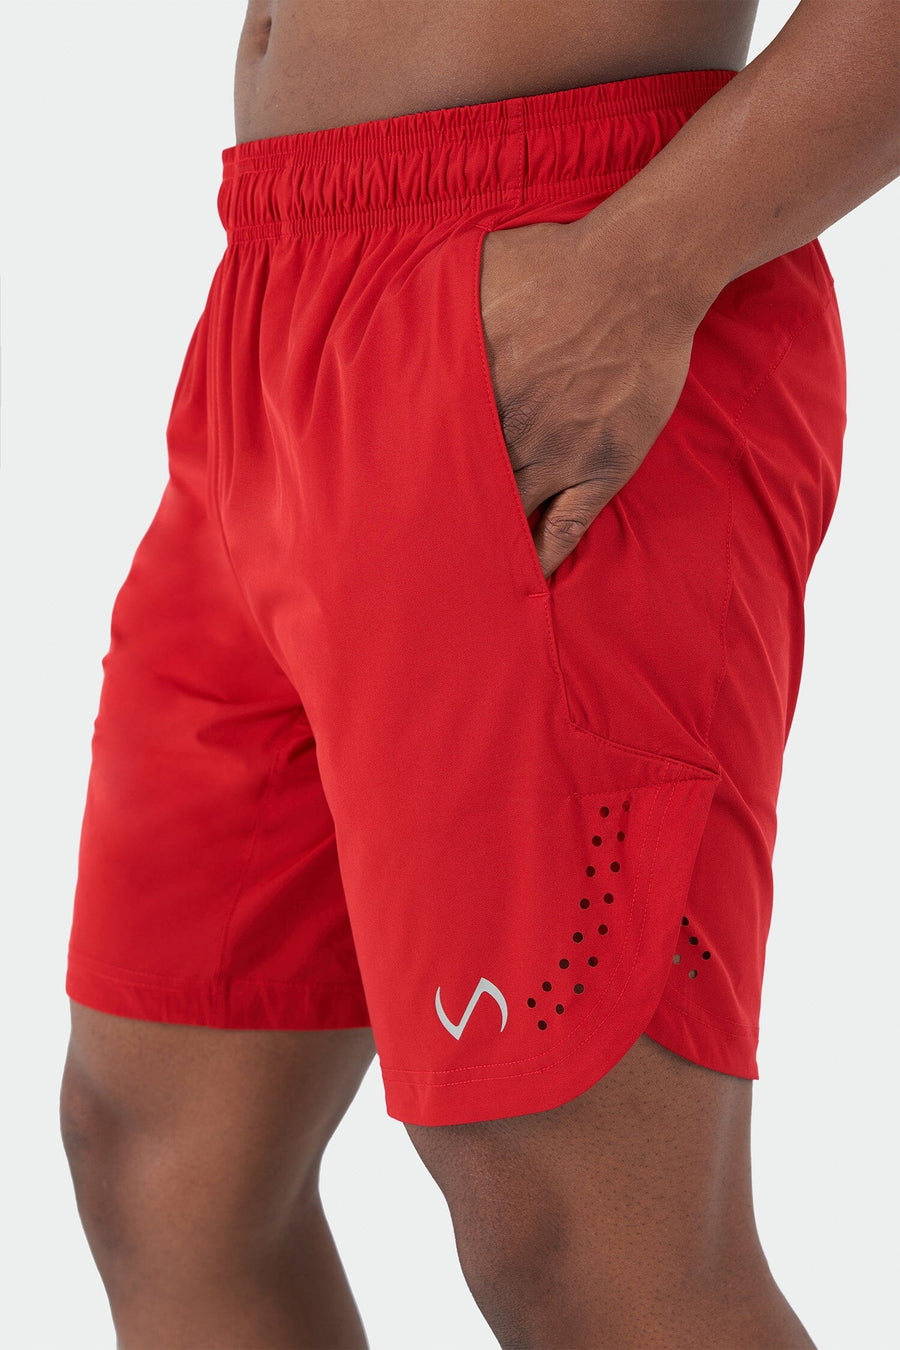 TLF Element 7 Inch - Red - 2 Shorts